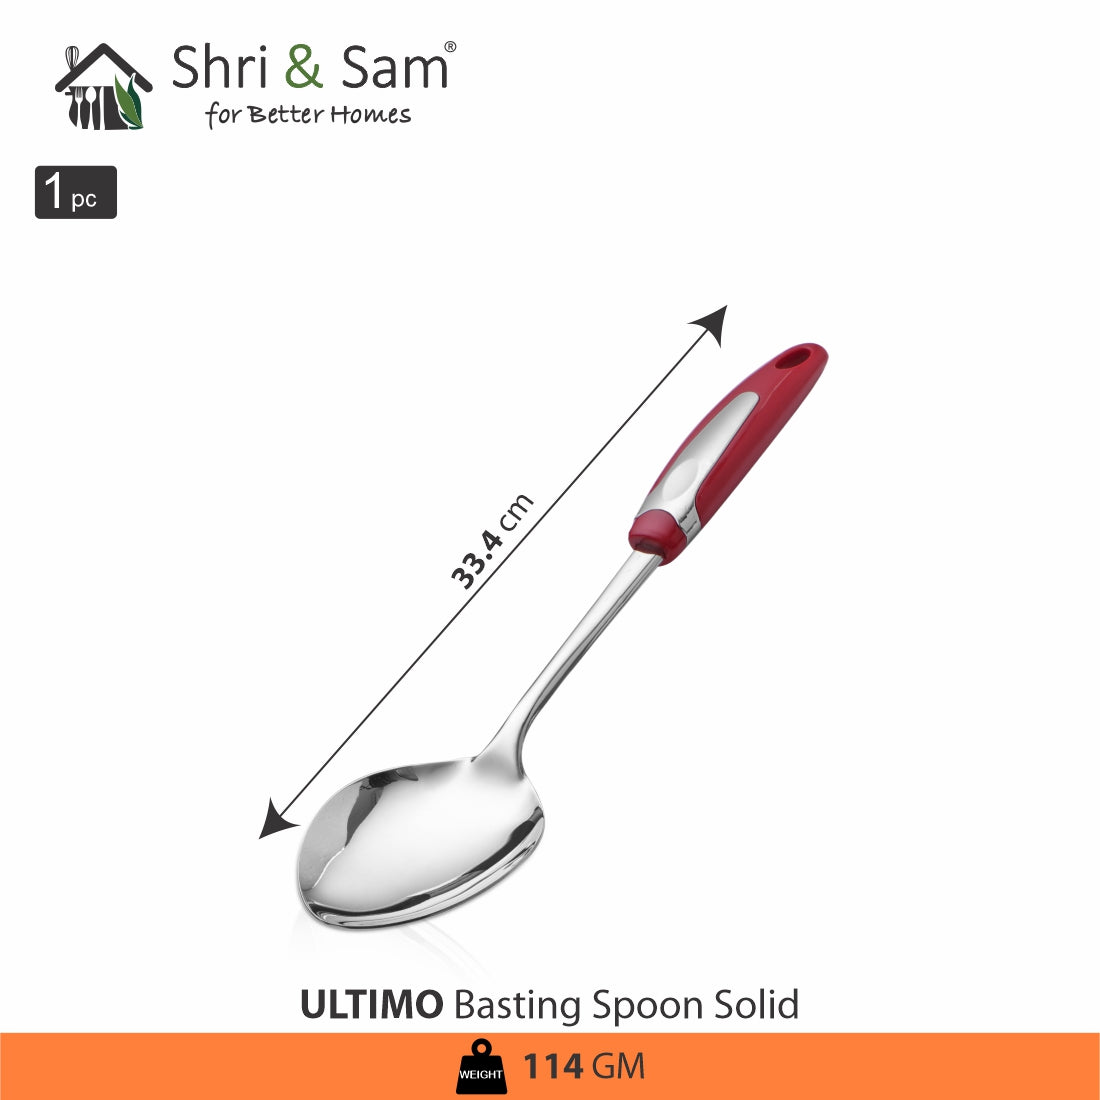 Stainless Steel Basting Spoon Solid Ultimo